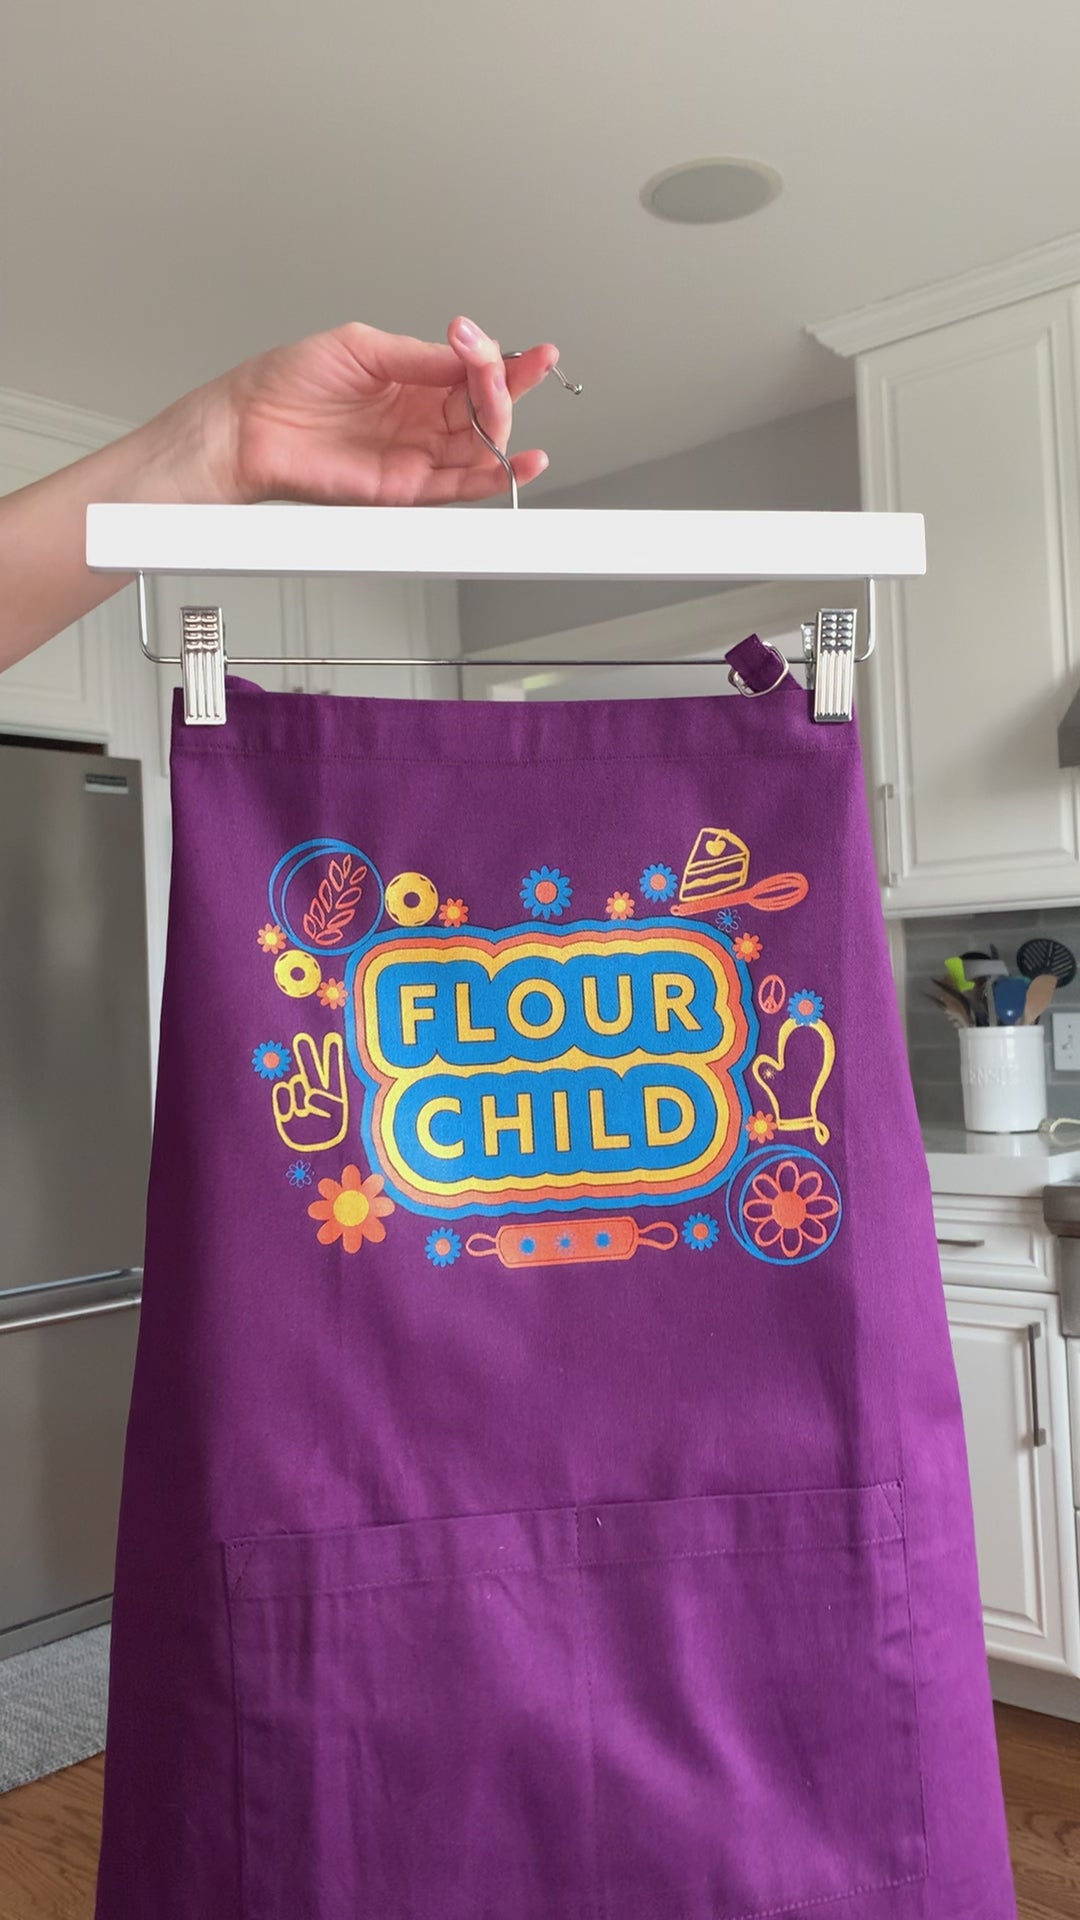 A purple apron that reads "Flour Child" with colorful illustrations hangs on a hanger